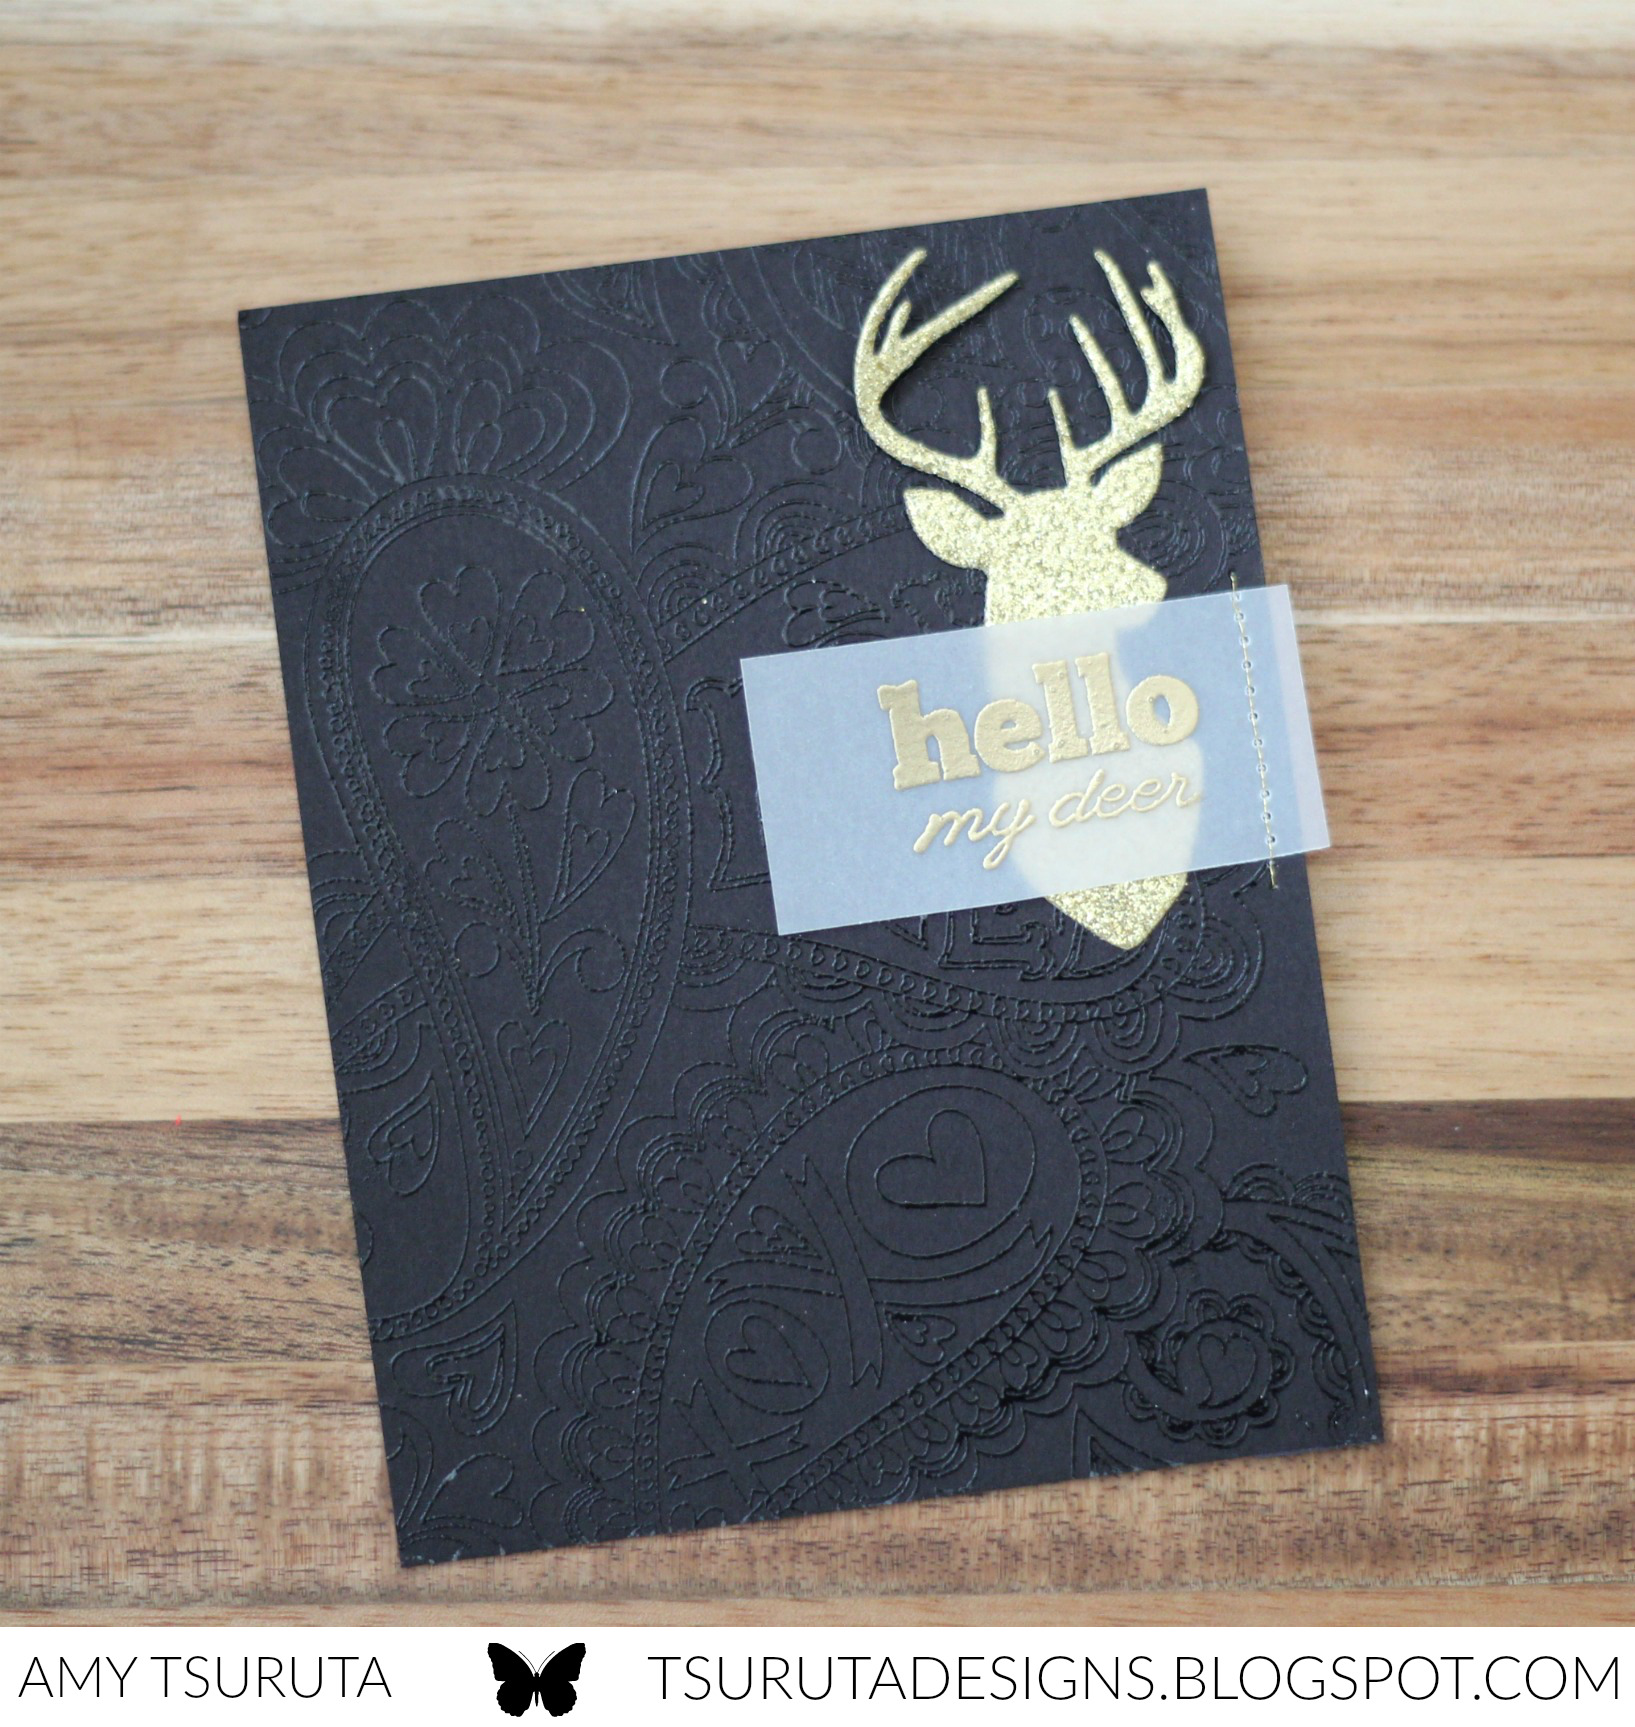 Hello my deer by Amy Tsuruta for Impress + Savvy  Stamps